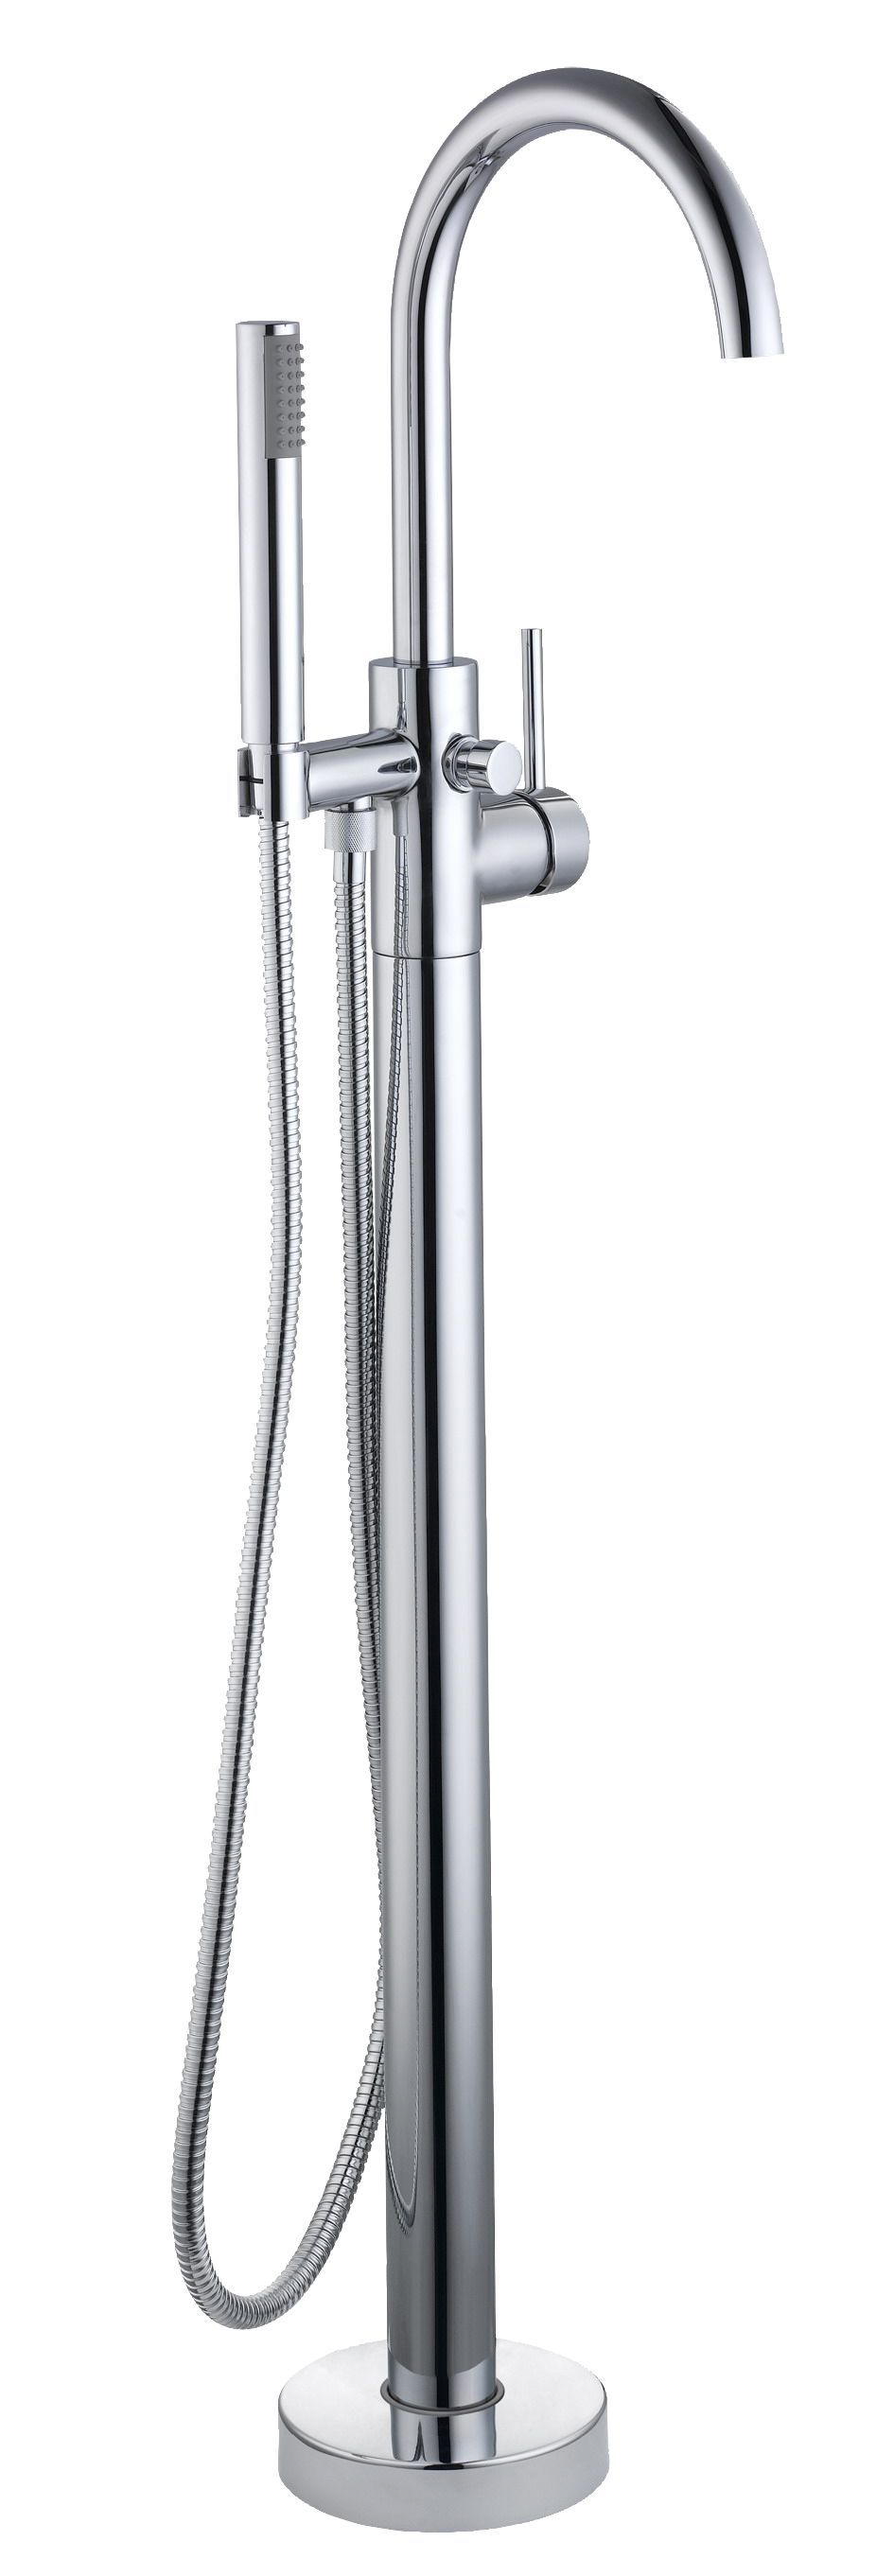 Select Chrome effect Shower mixer Tap